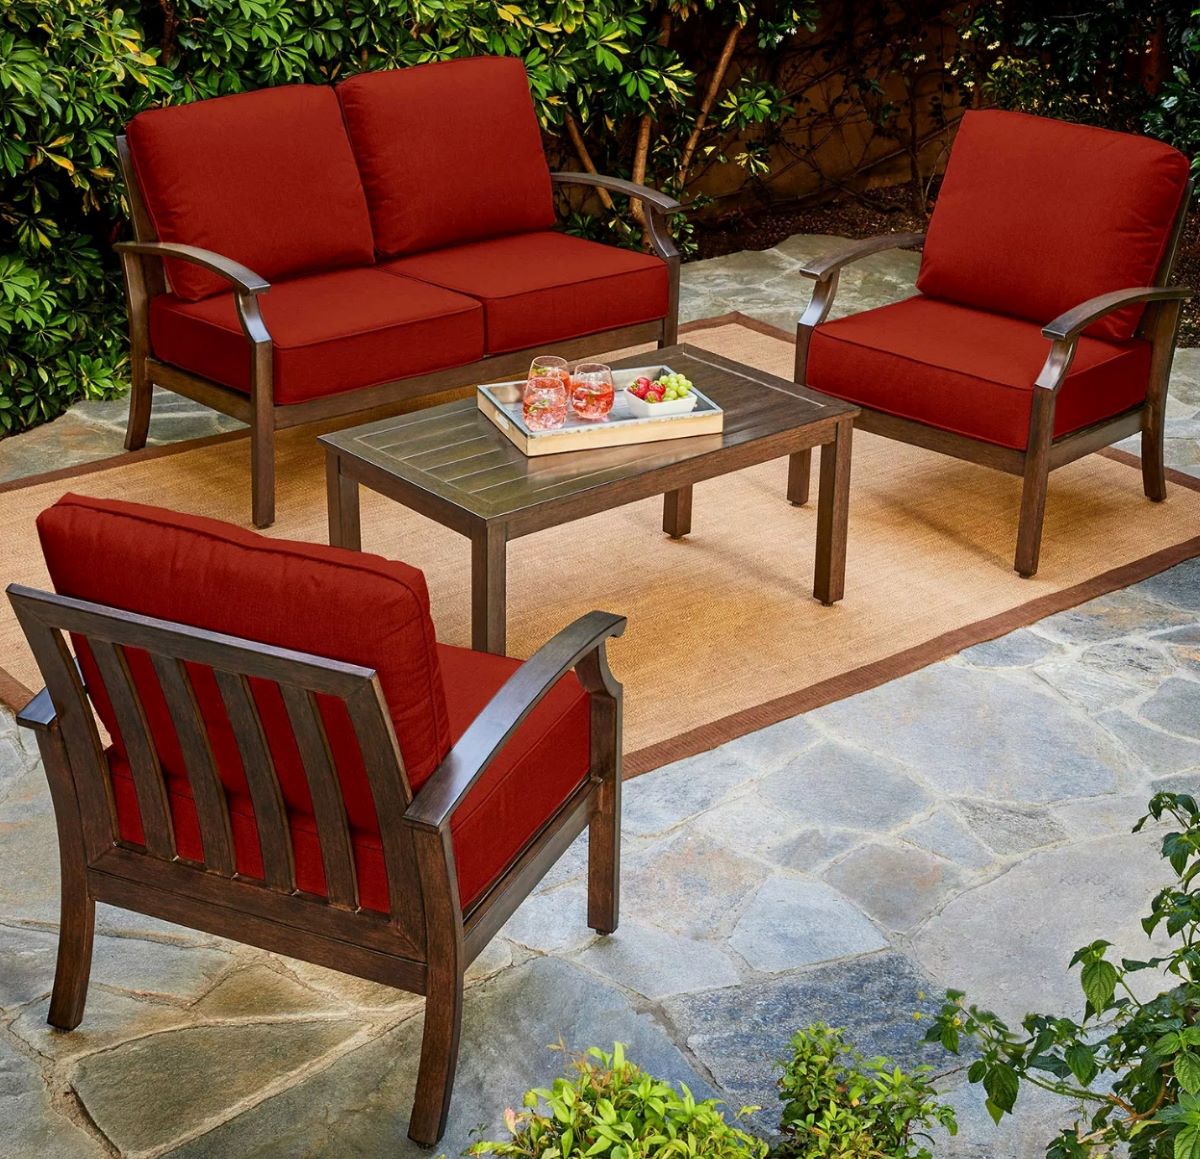 Patio with two chairs, loveseat, and coffee table